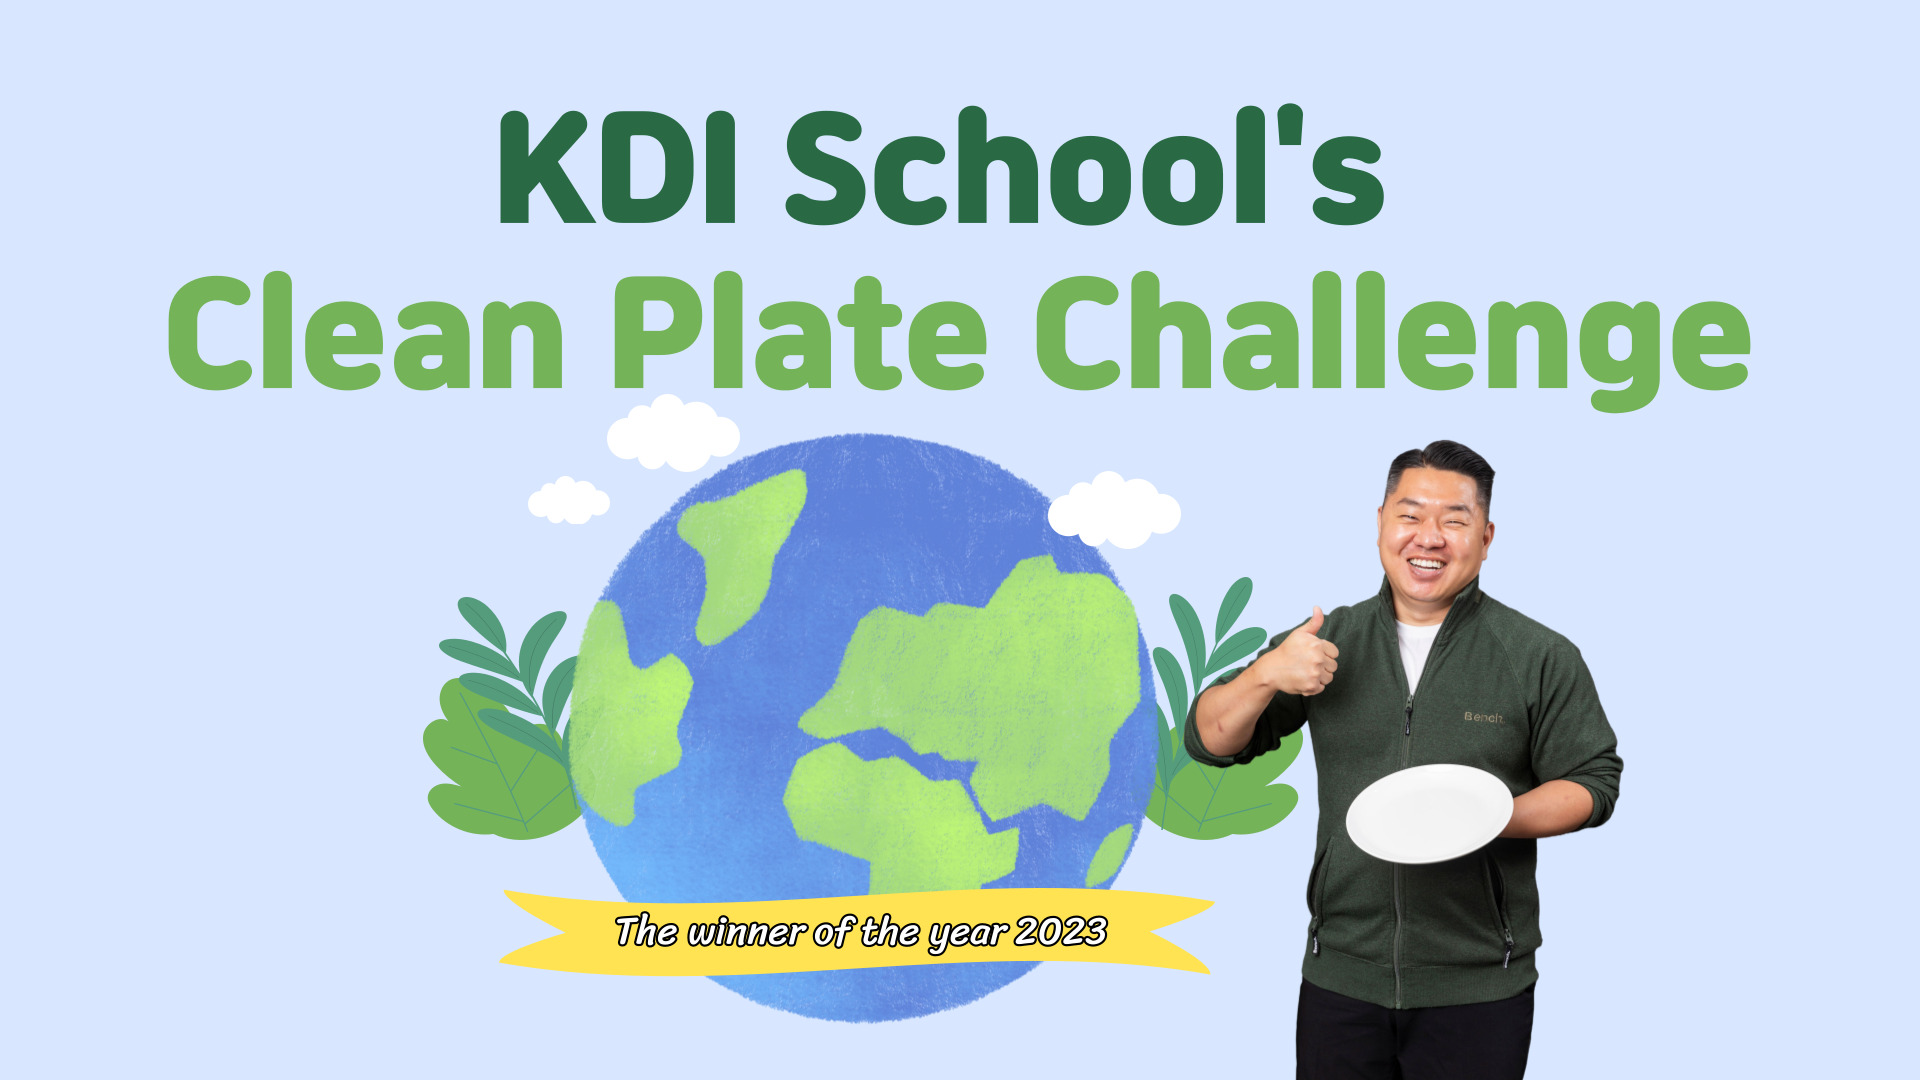 KDI School's Clean Plate Challenge: Serving Up Change Towards a Greener and Safer Earth